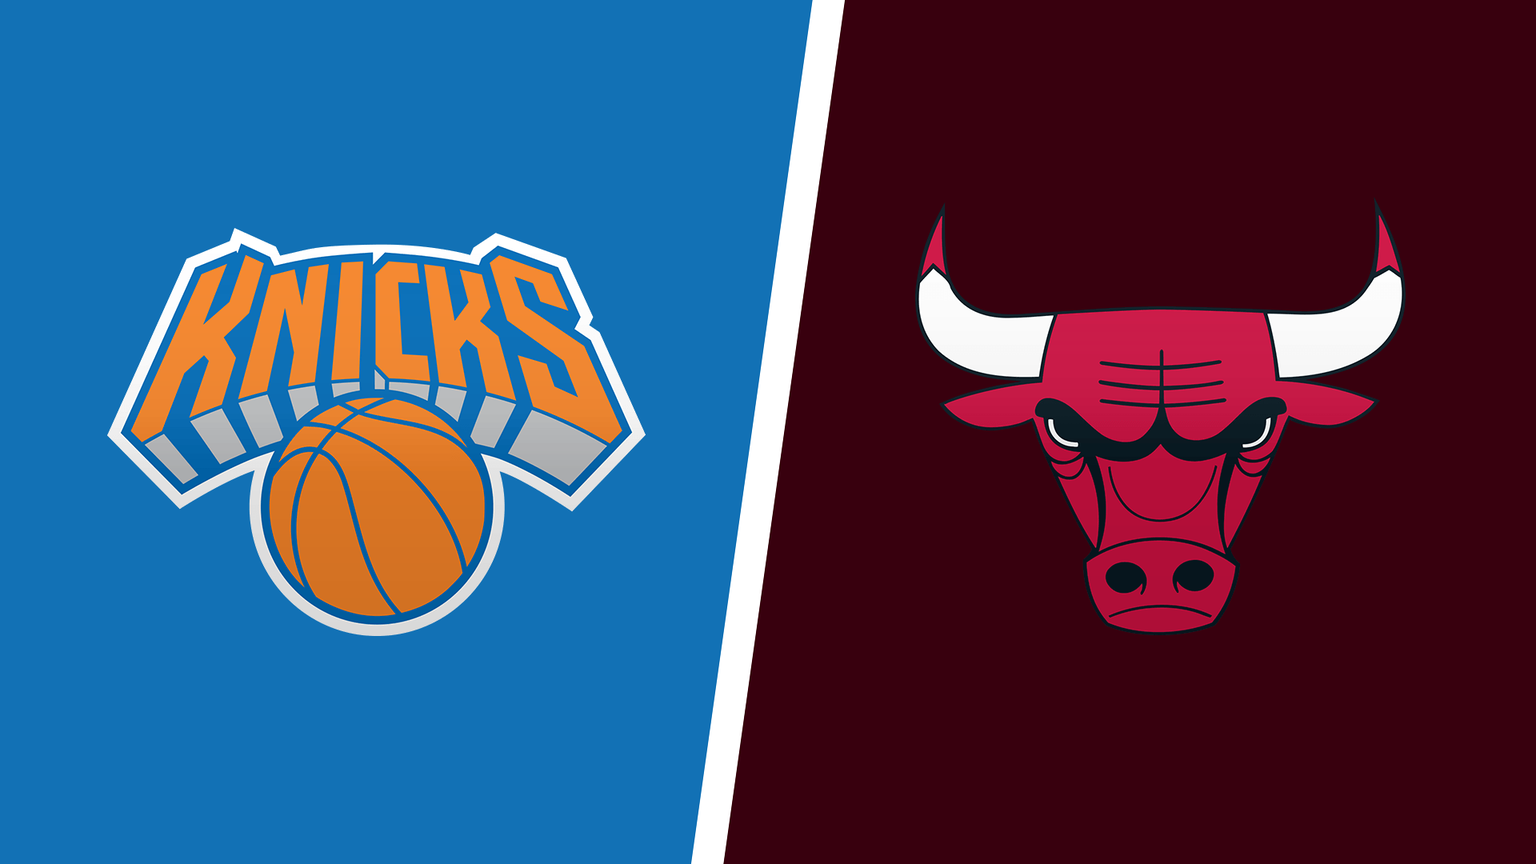 How to Watch Chicago Bulls vs. New York Knicks Game Live Online on